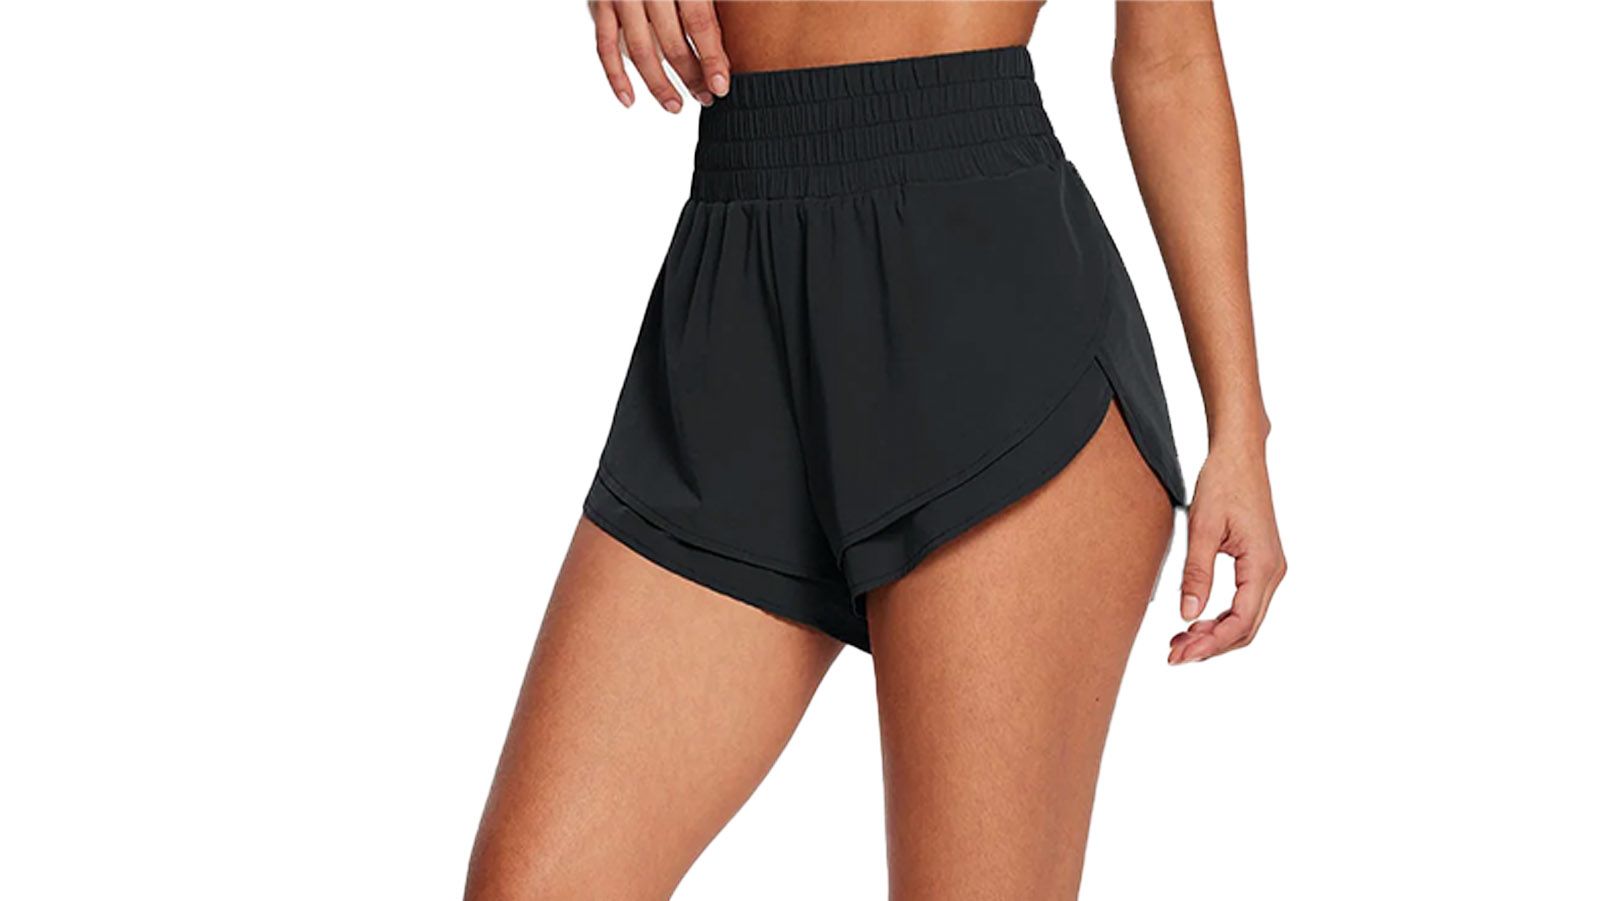 Baleaf Women's High Waisted Athletic Running Shorts Black - $15 New With  Tags - From Laura